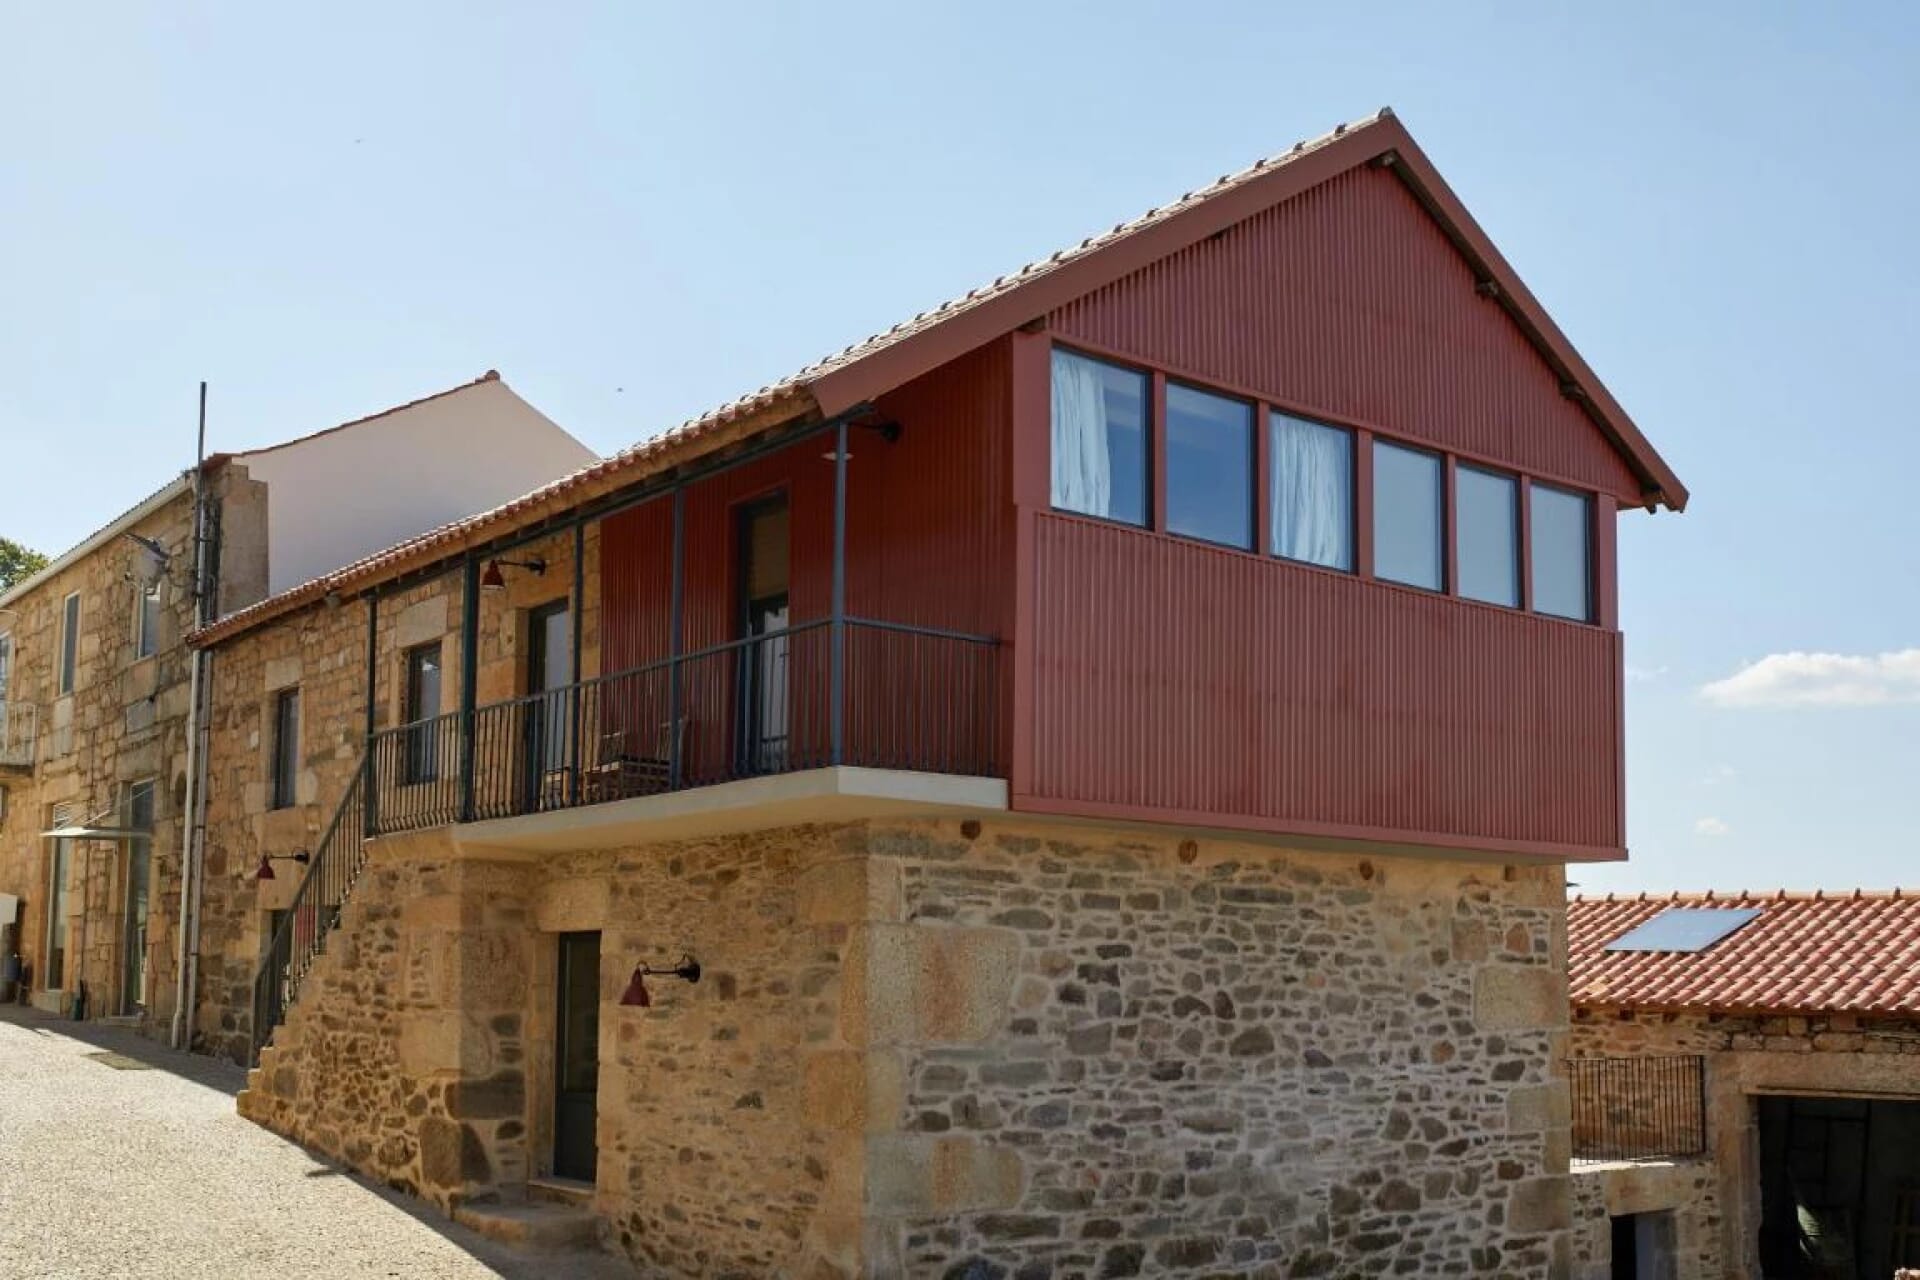 THE PINTA - New charming guest house in the Douro Valley